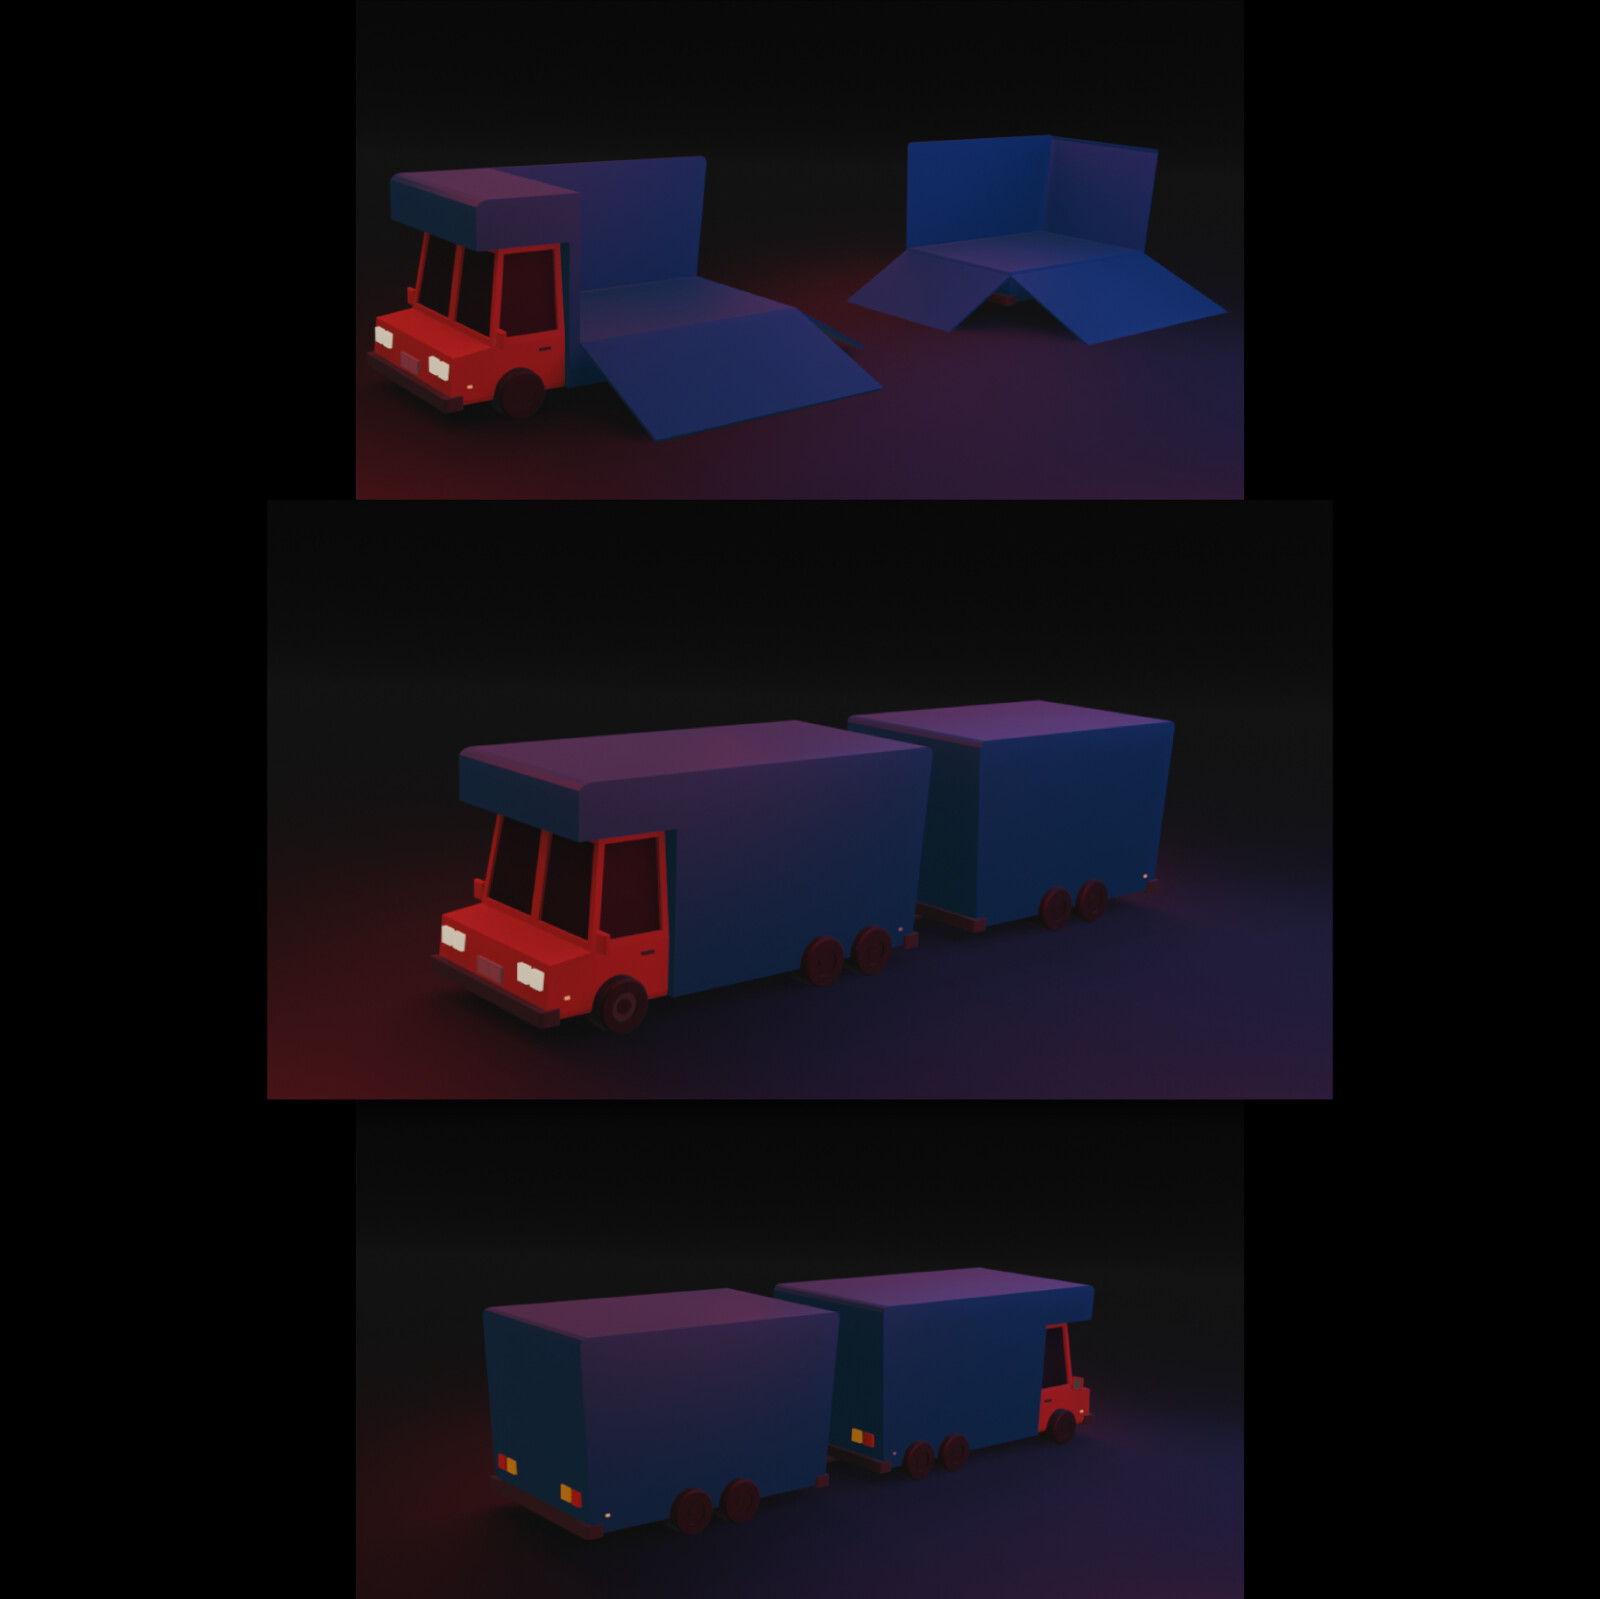 Game Art Assets I created: Stylized Moving Truck with a trailer.

Modeled, painted and rendered in Blender. Rendered images put together in Adobe Illustrator. 